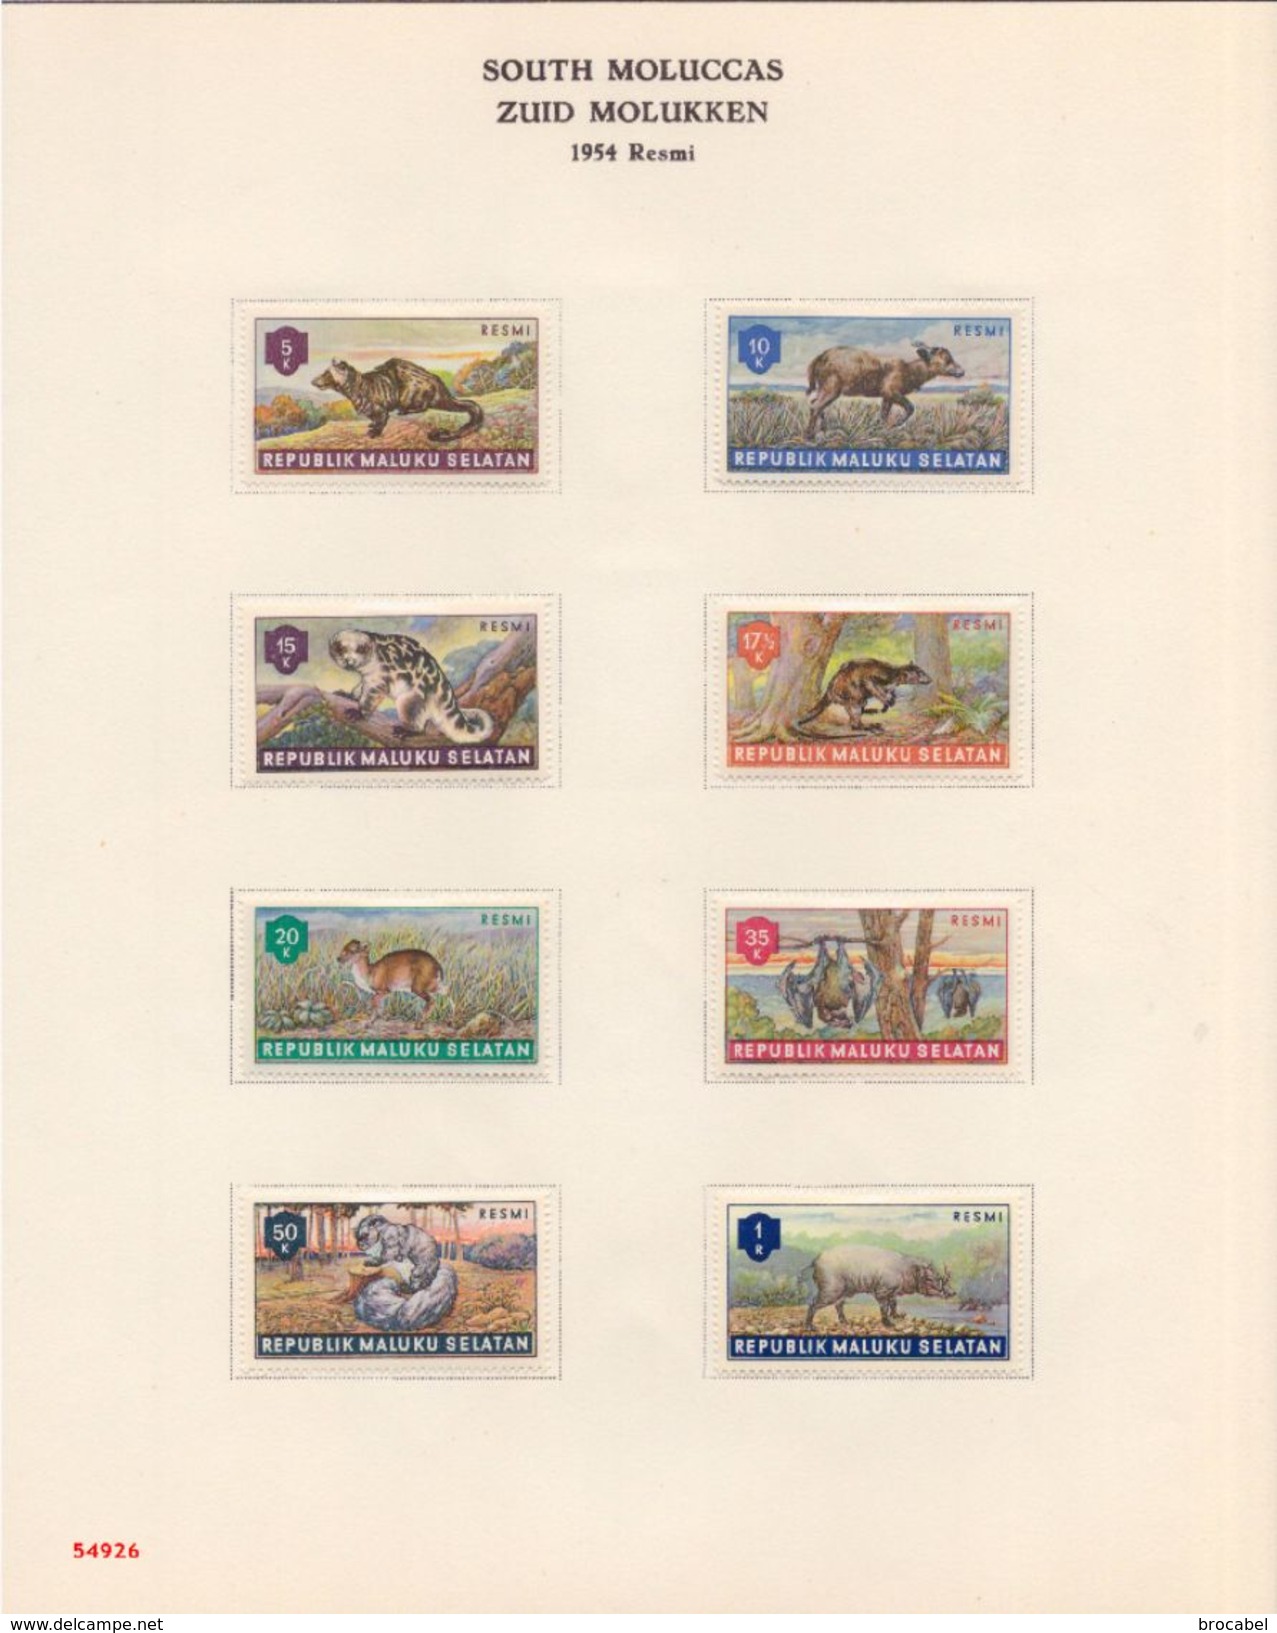 South Moluccas - Zuid mulukken Full Collection Airmail UPU Flowers Animals United Nation Pacific Liberation ( br_lo )